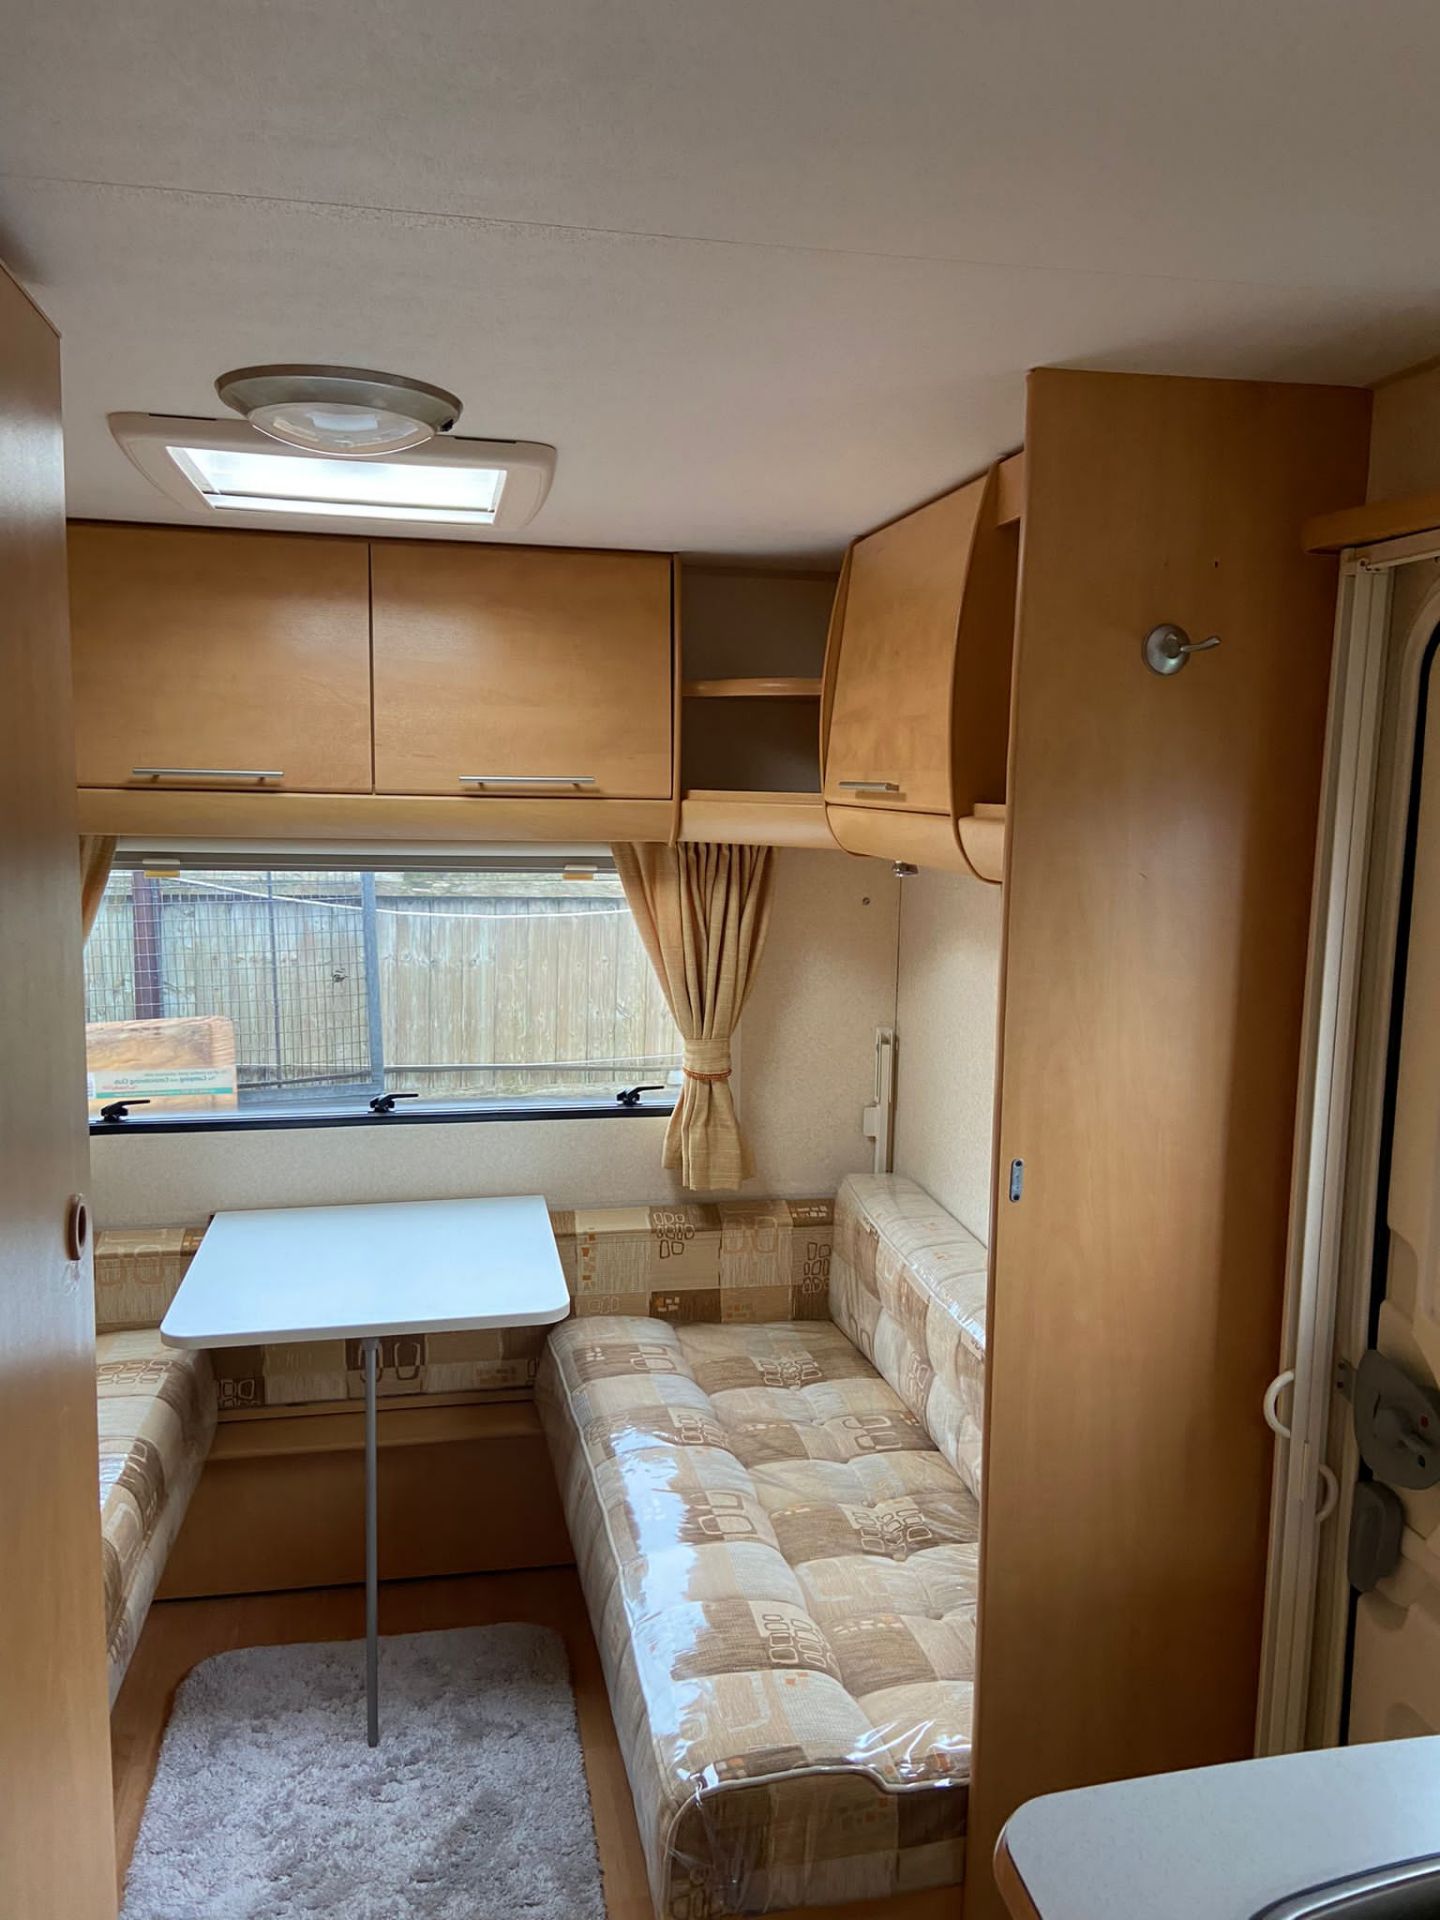 ** ON SALE ** Bailey Pageant series 6 - 4 Berth - '2007 Year' Middle Bathroom - No Vat - Image 9 of 11